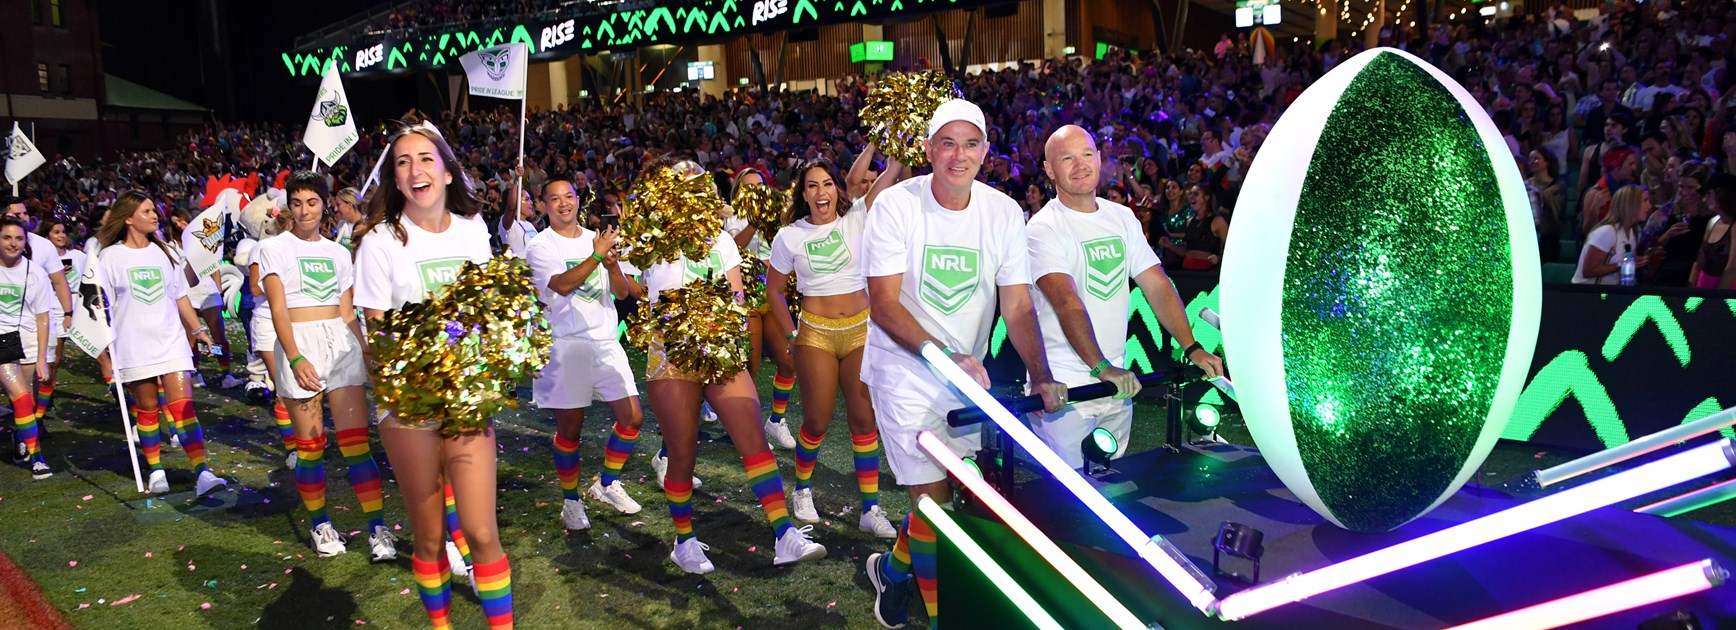 NRL to have float at 2021 Mardi Gras